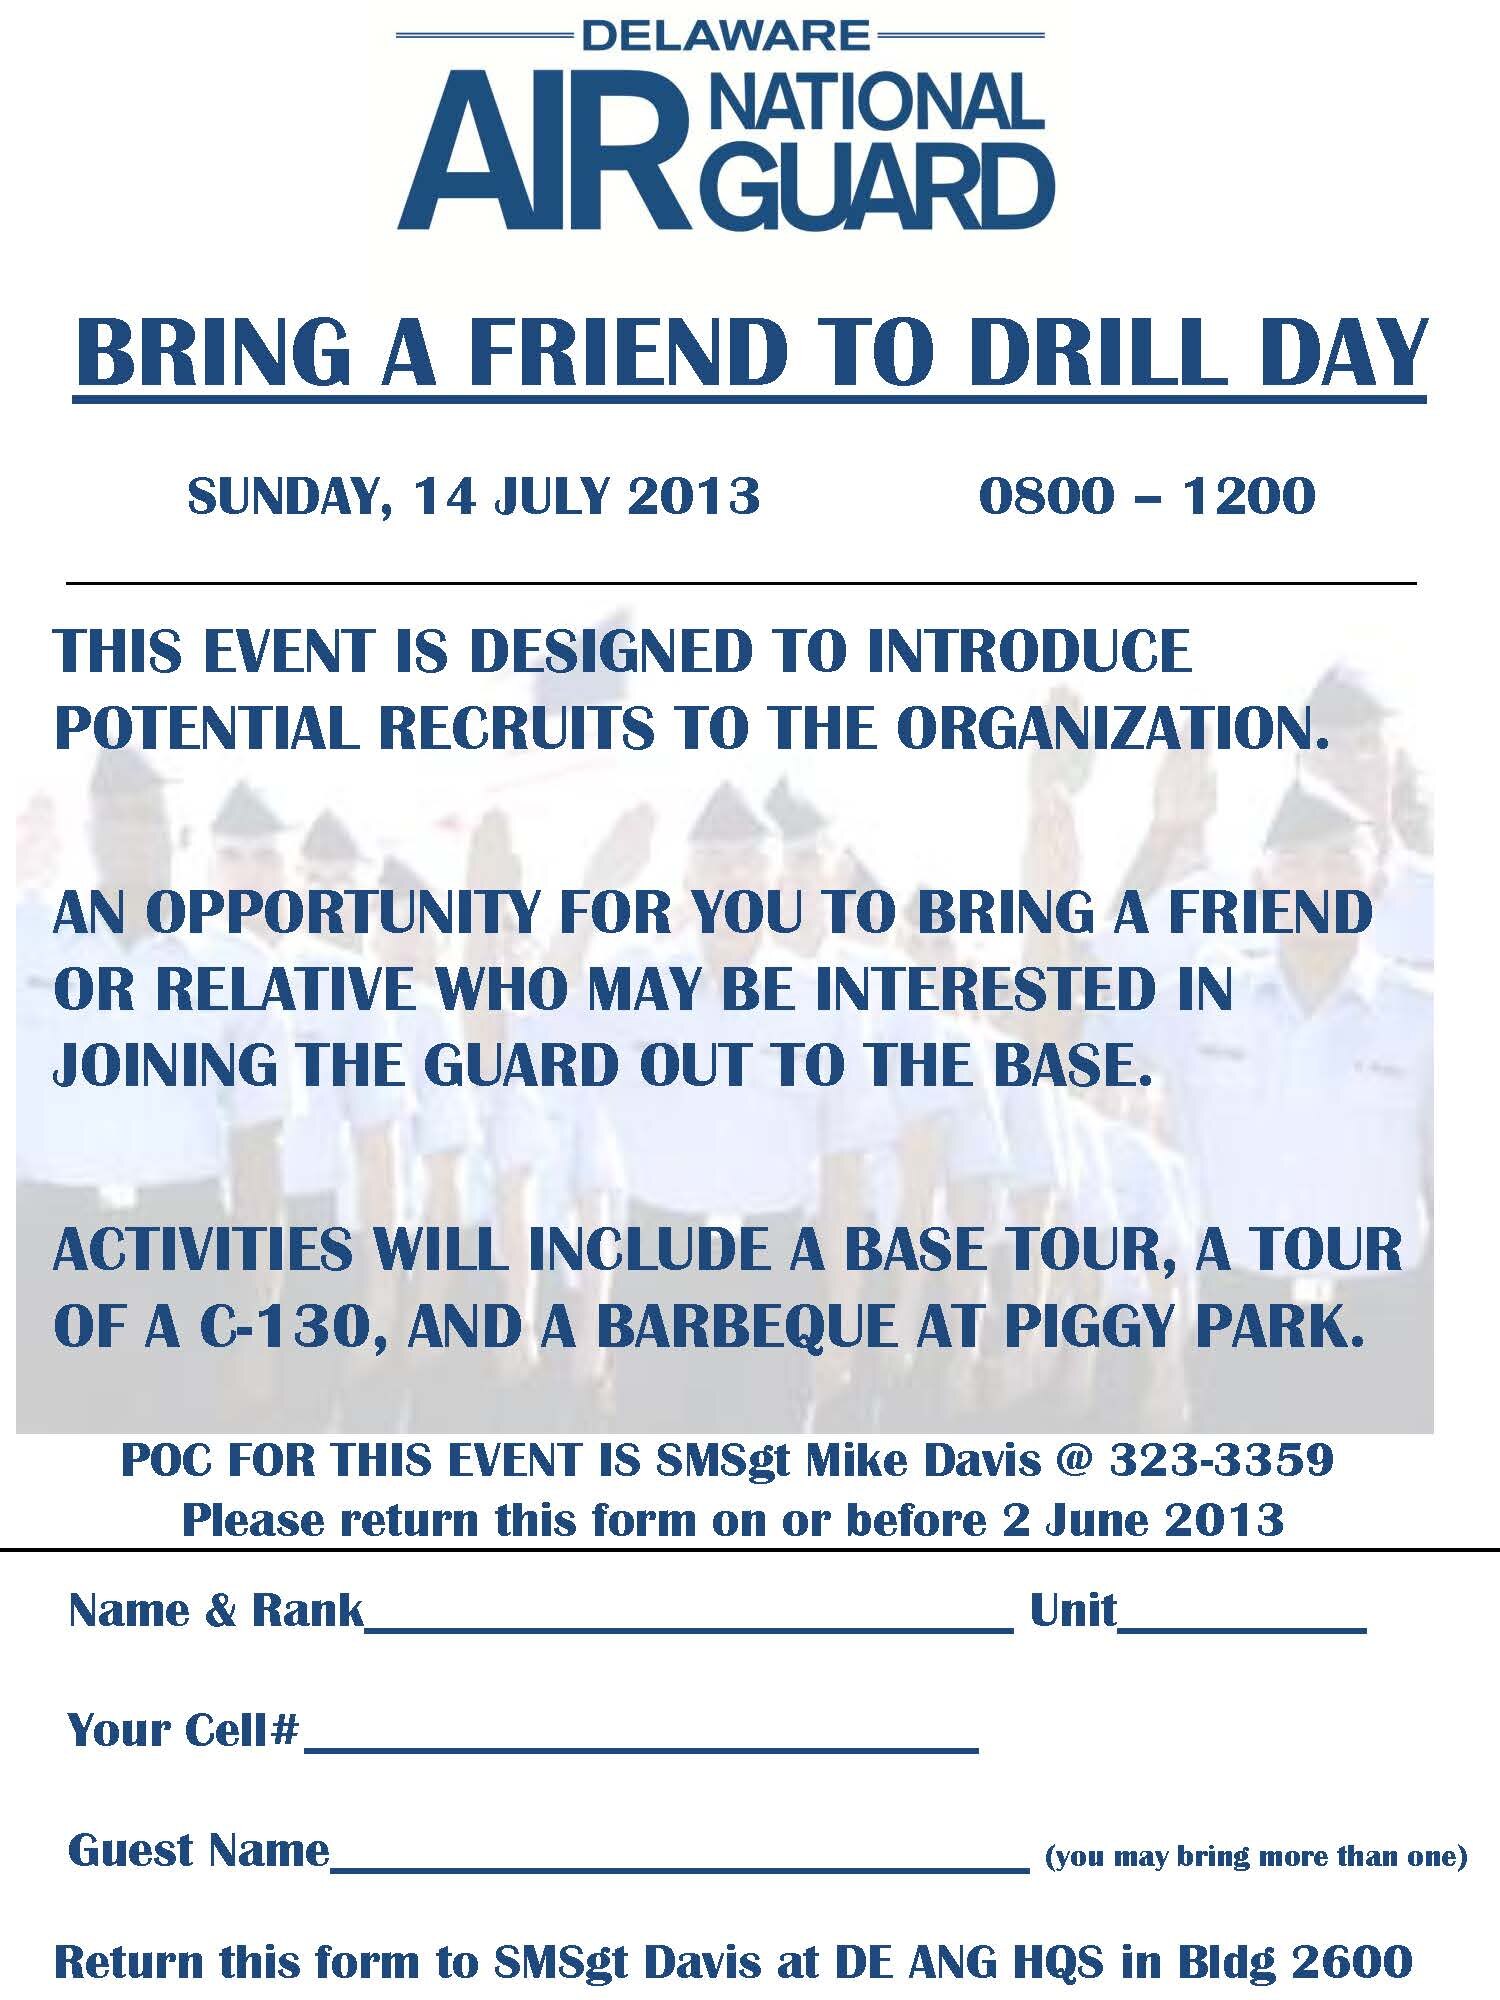 Prospective members may find out more about the Delaware Air National Guard in person during our 'Bring a Friend to Drill Day' on Sunday, July 14, 2013, from 8:00 a.m. to Noon. Come to the New Castle ANG Base, 2600 Spruance Drive, New Castle, Del. Enjoy a base tour, a tour of a C-130 aircraft and a bar-be-cue in our picnic area. Share friendly conversation with people in your own age group and a little older. It is free; please register by June 2. Contact Senior Master Sgt. Mike Davis, 323-3359.